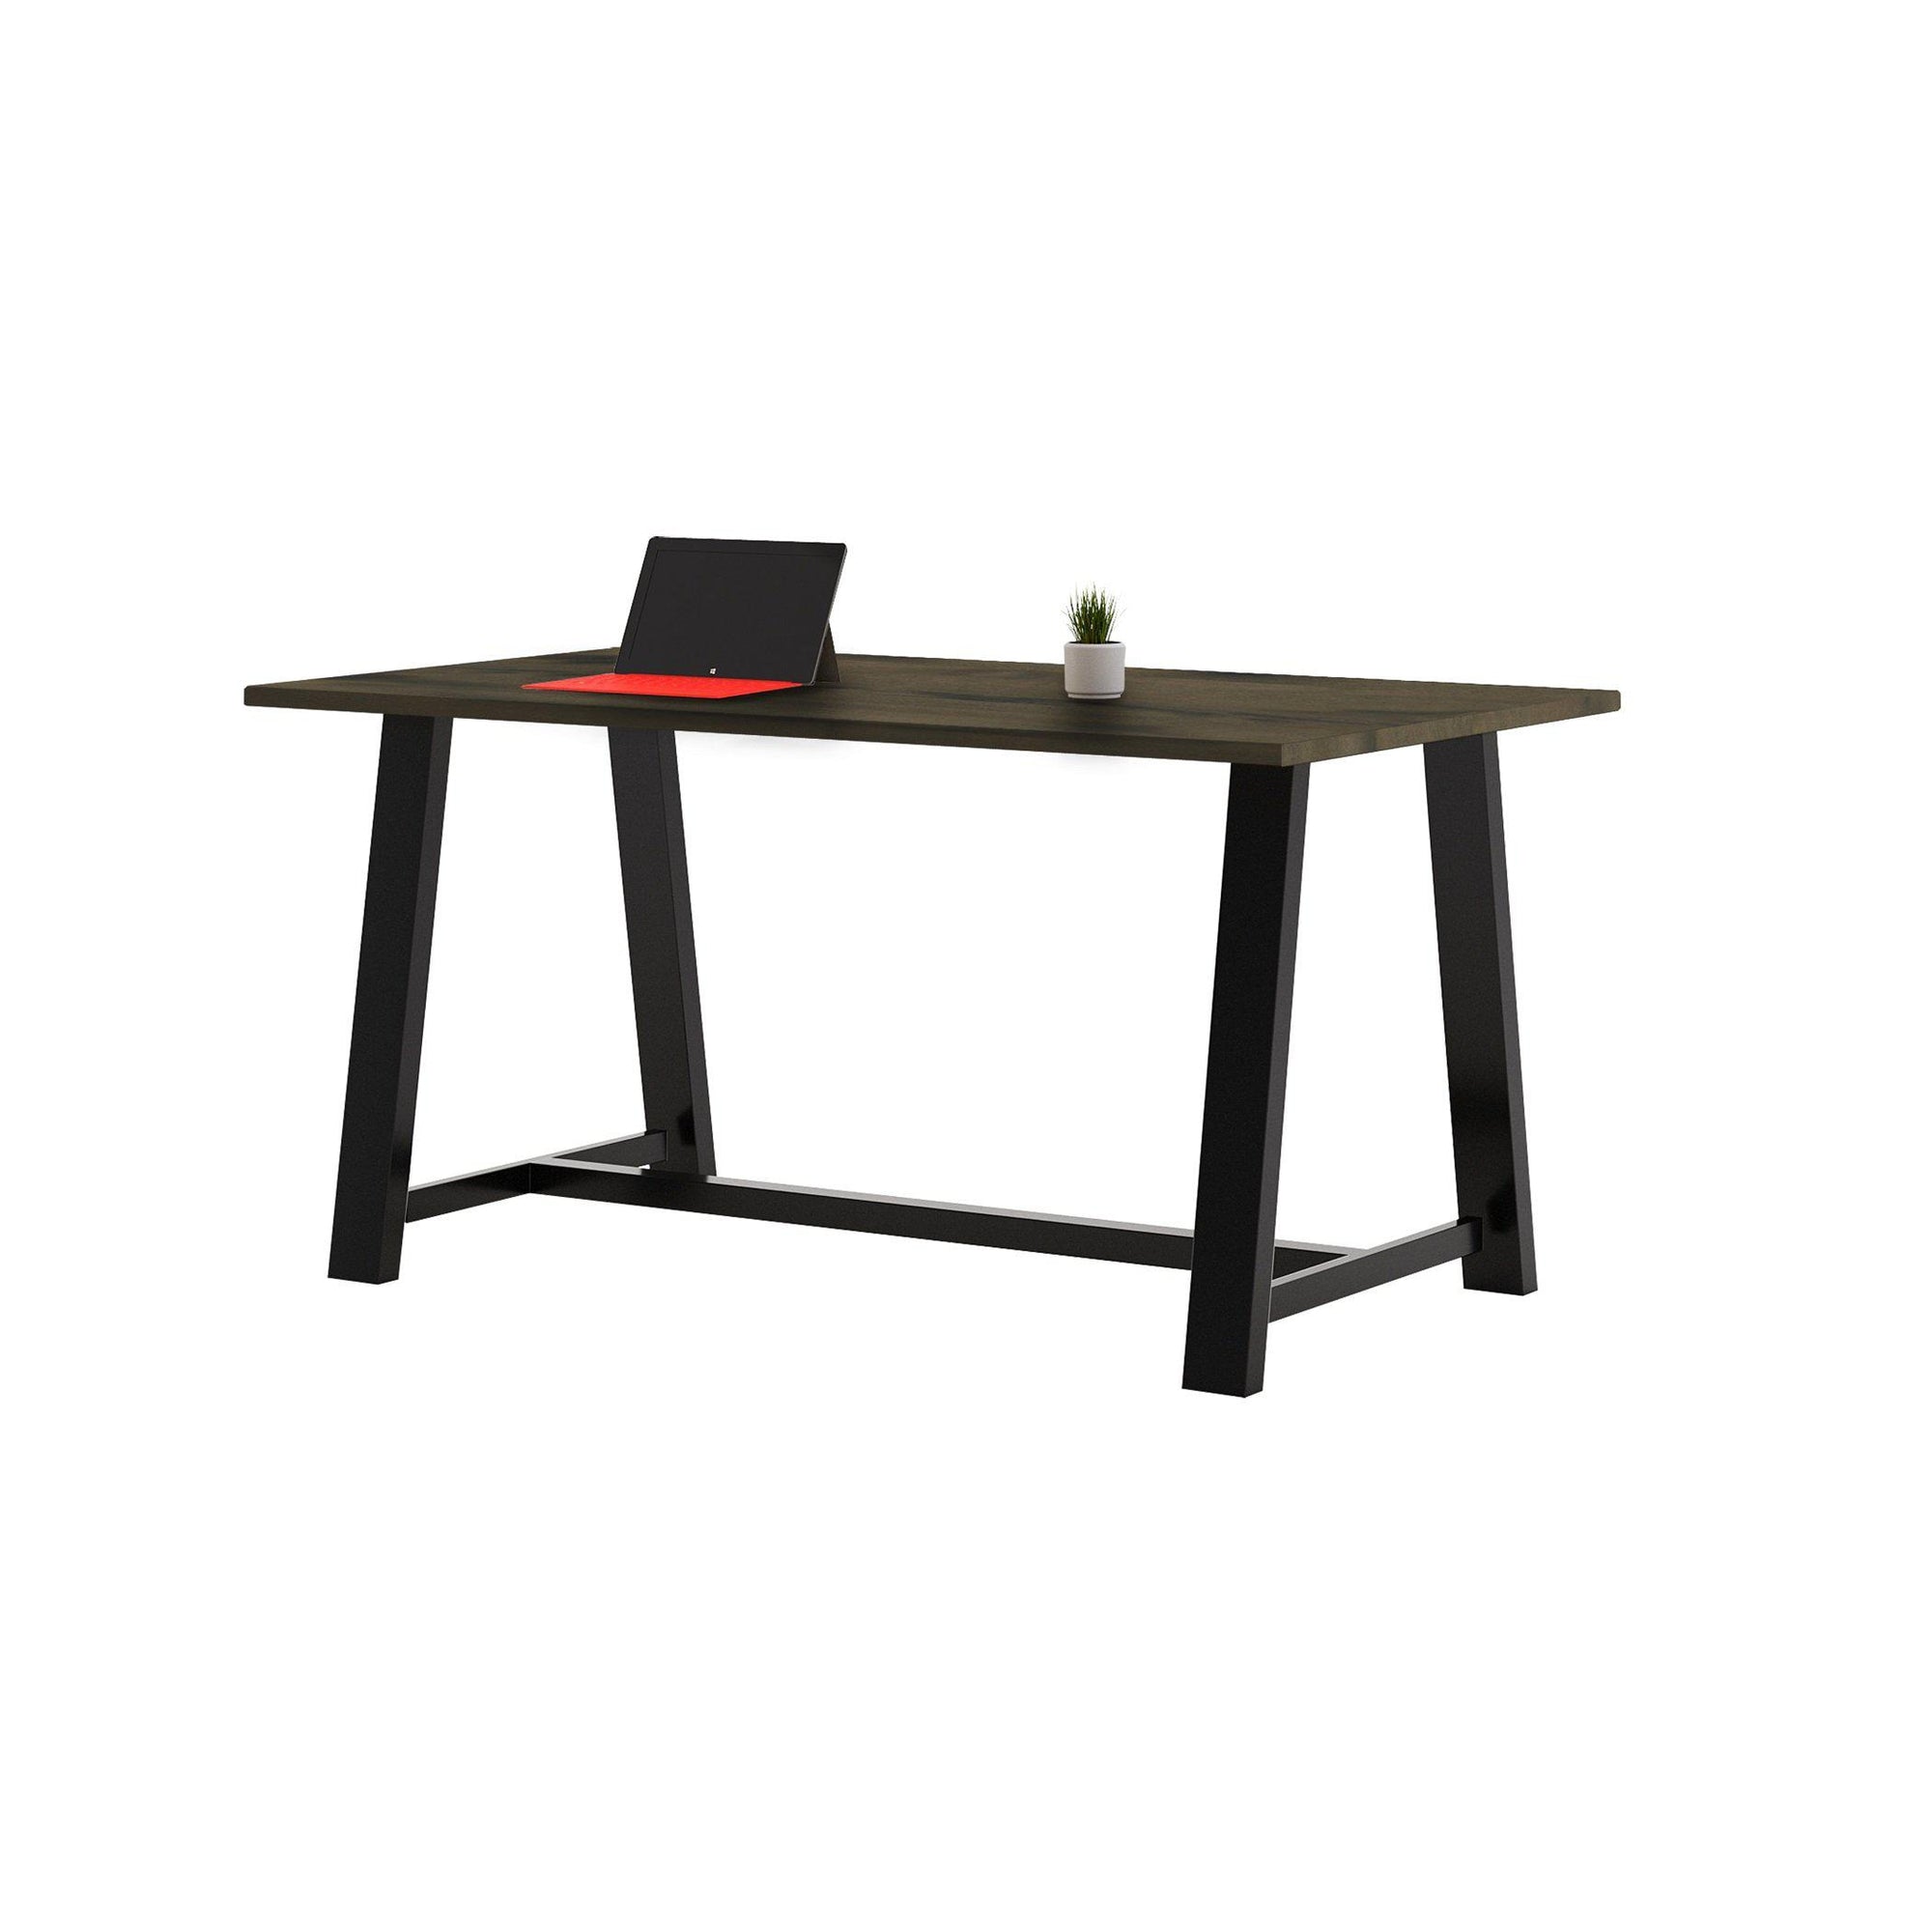 Midtown Table, Counter Height, 42" x 72" x 36"H, High Pressure Laminate Top, 3mm PVC Edge, 72" Base